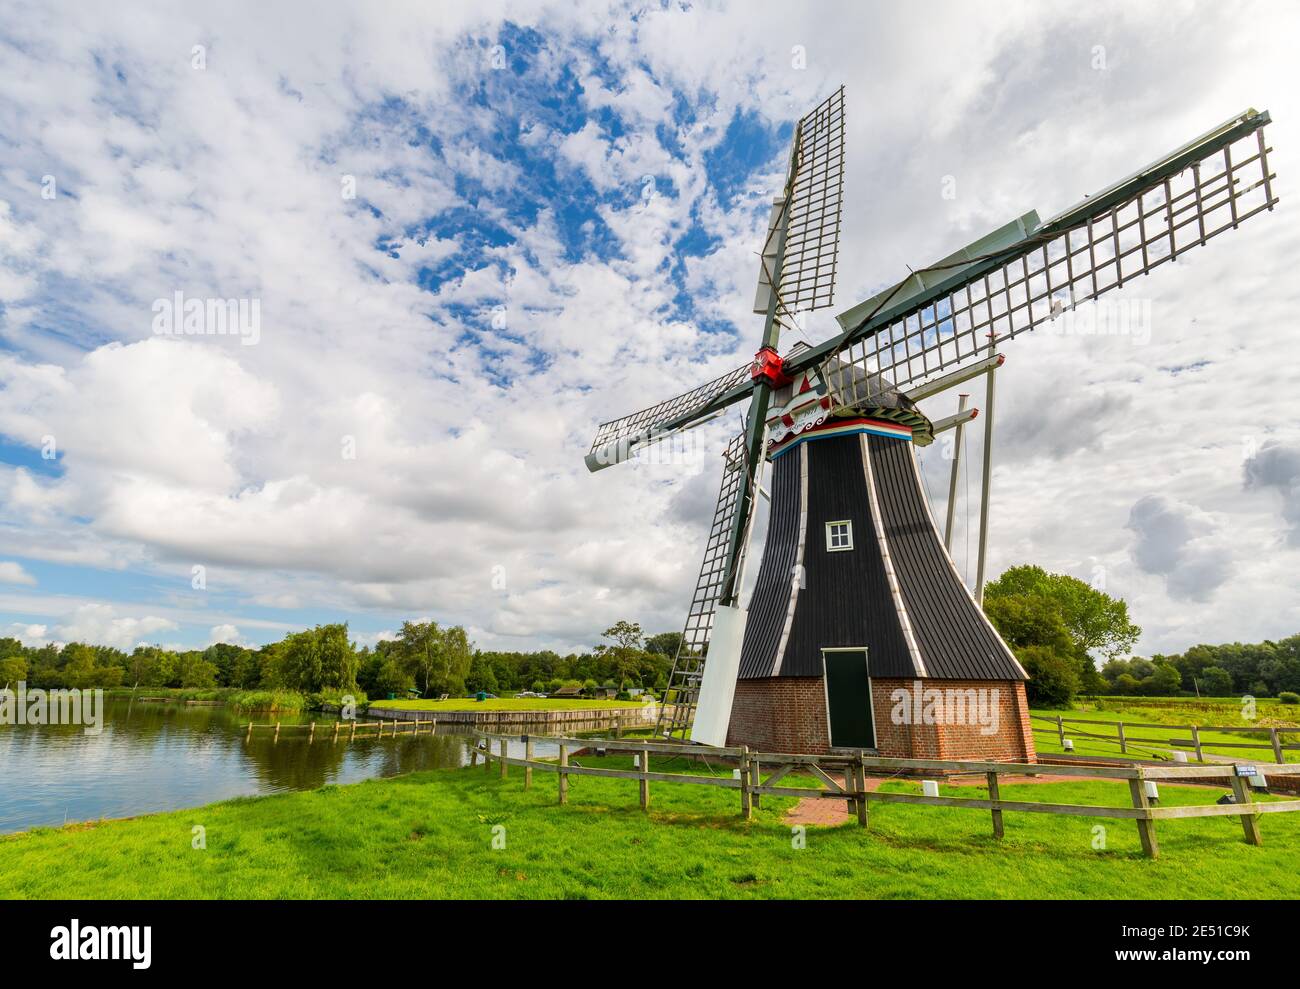 Wide angle view of a dutch landscape, with meadows, canals and an ancient black and white windmill in the foreground Stock Photo